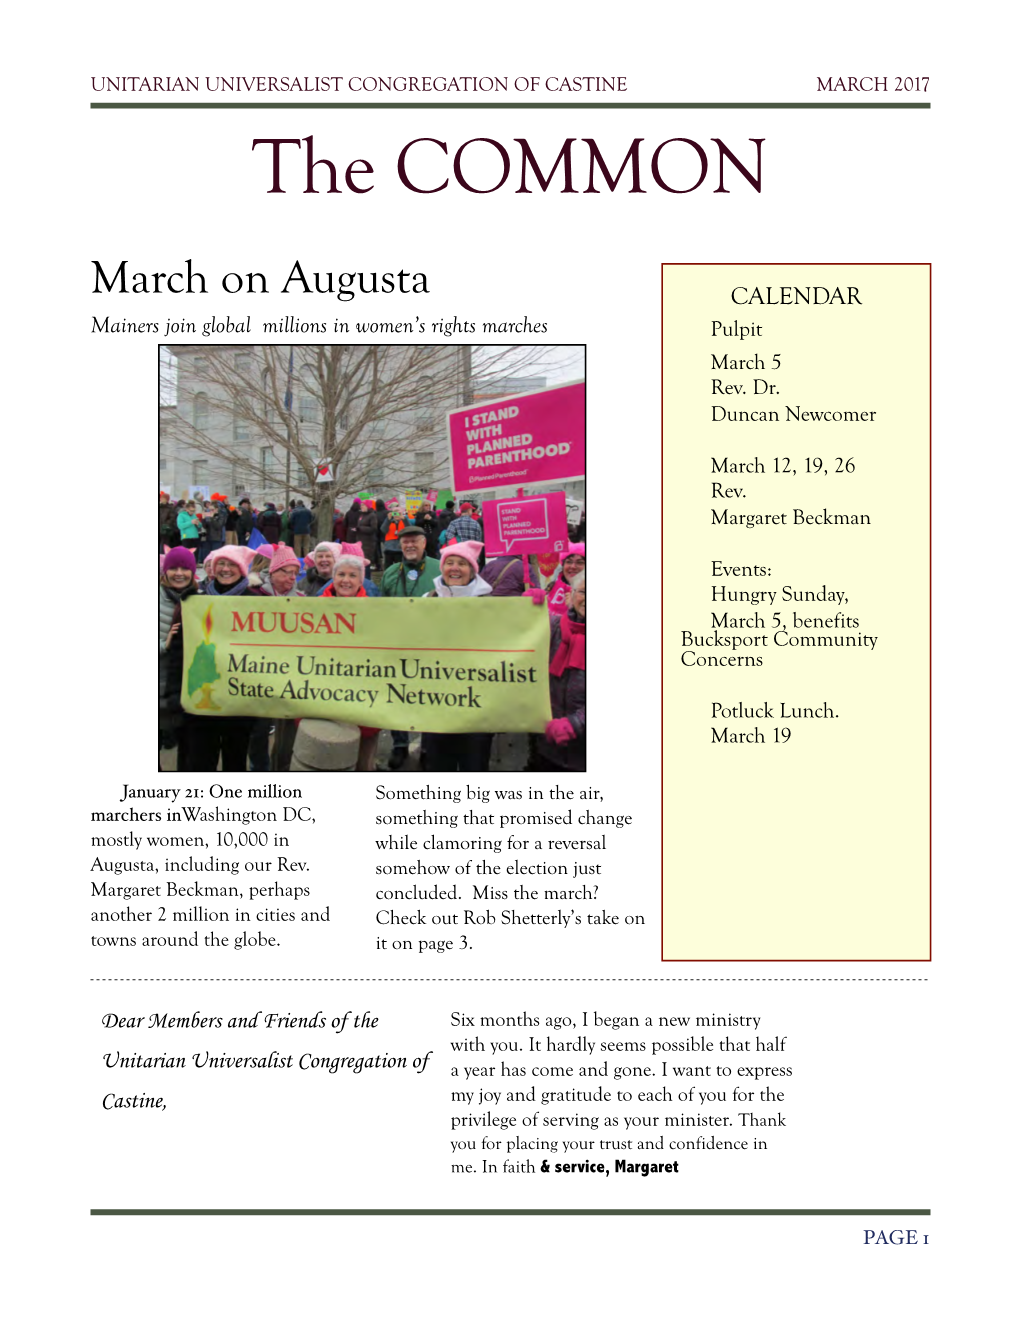 Common March 2017